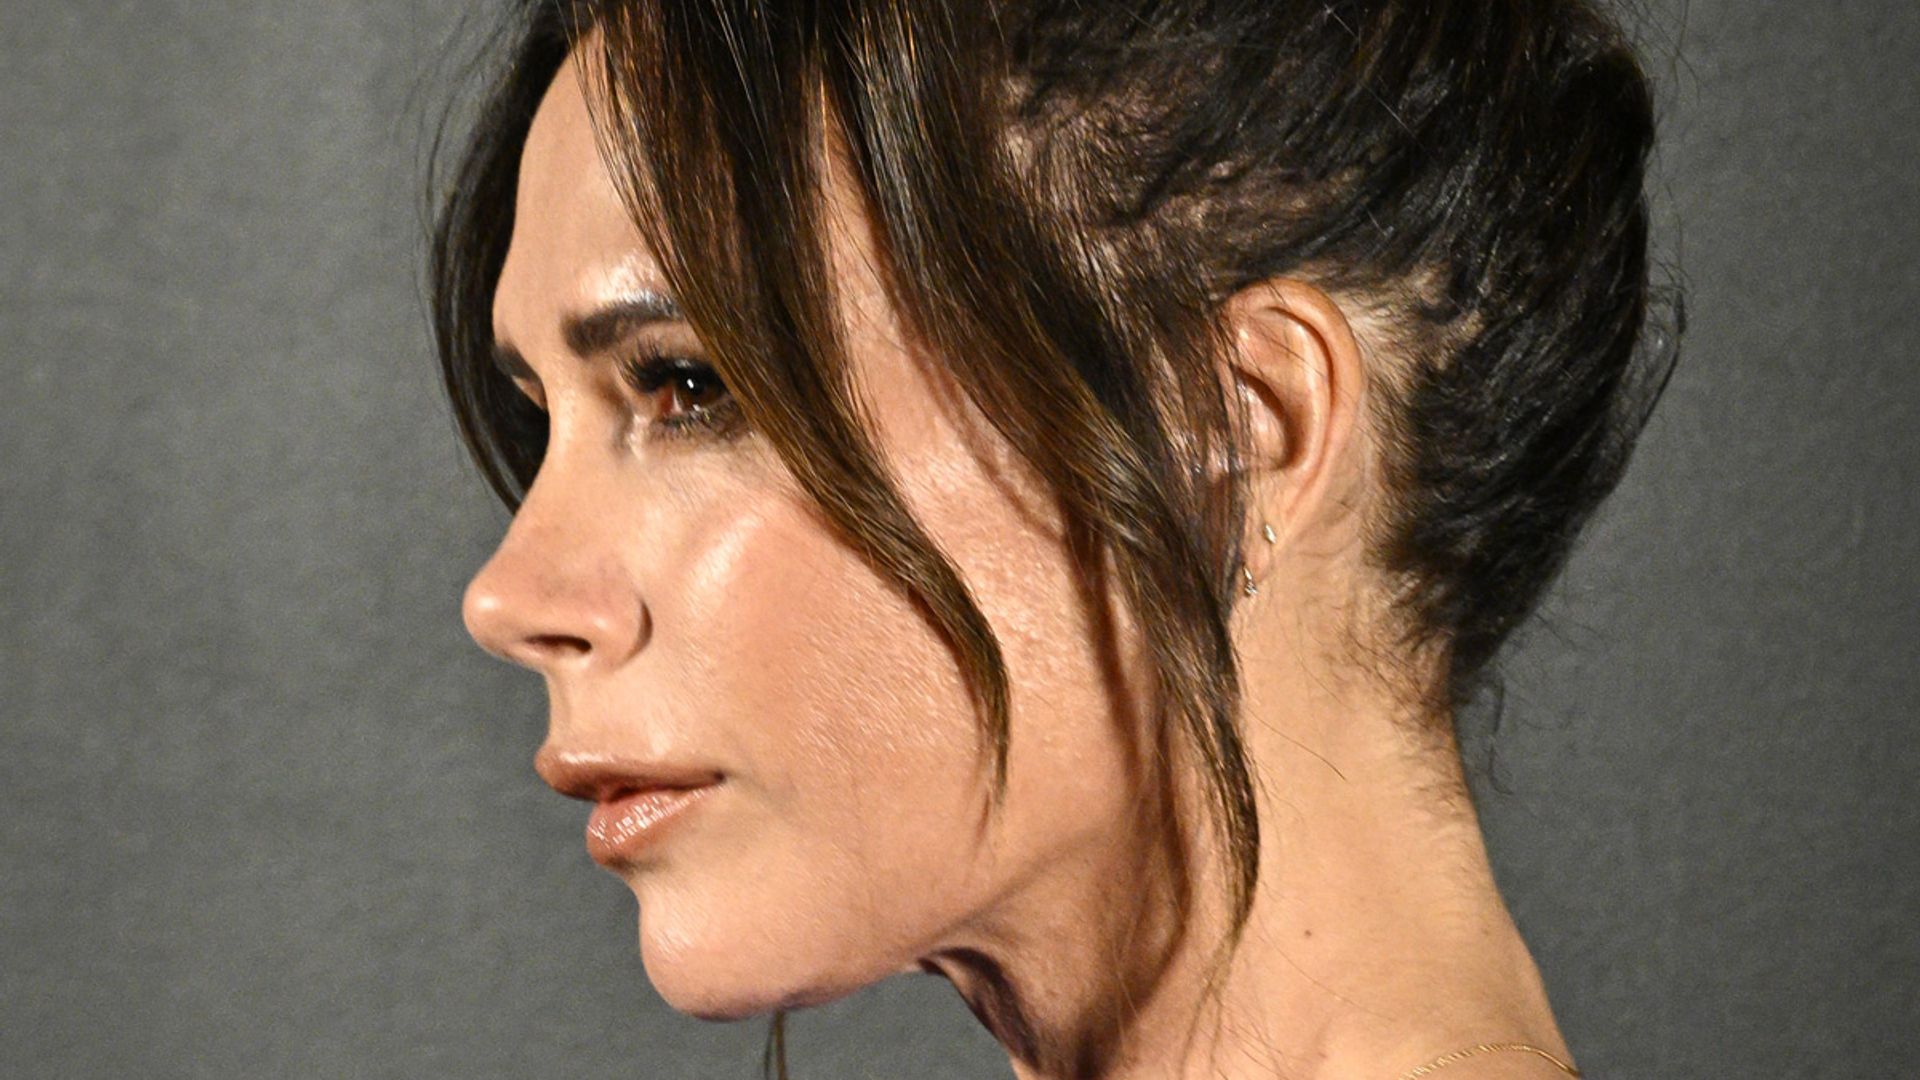 Victoria Beckham's new slinky dress seriously divides fan opinion | HELLO!